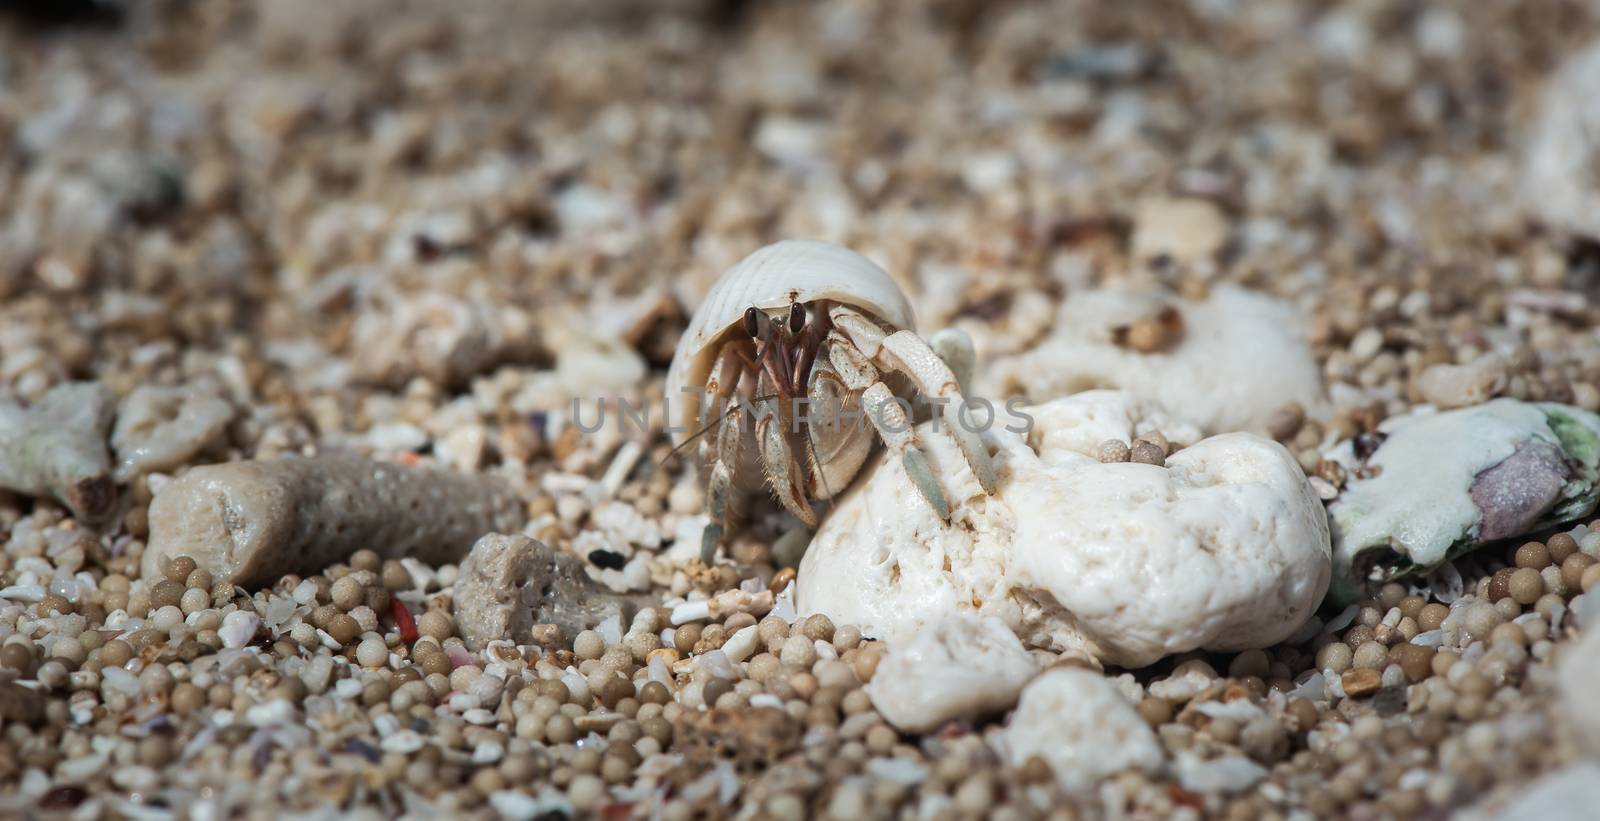 Scene of a herbit crab lifetime.  Admiring with the surrounding beauty, or may be thinking about his previous lives.